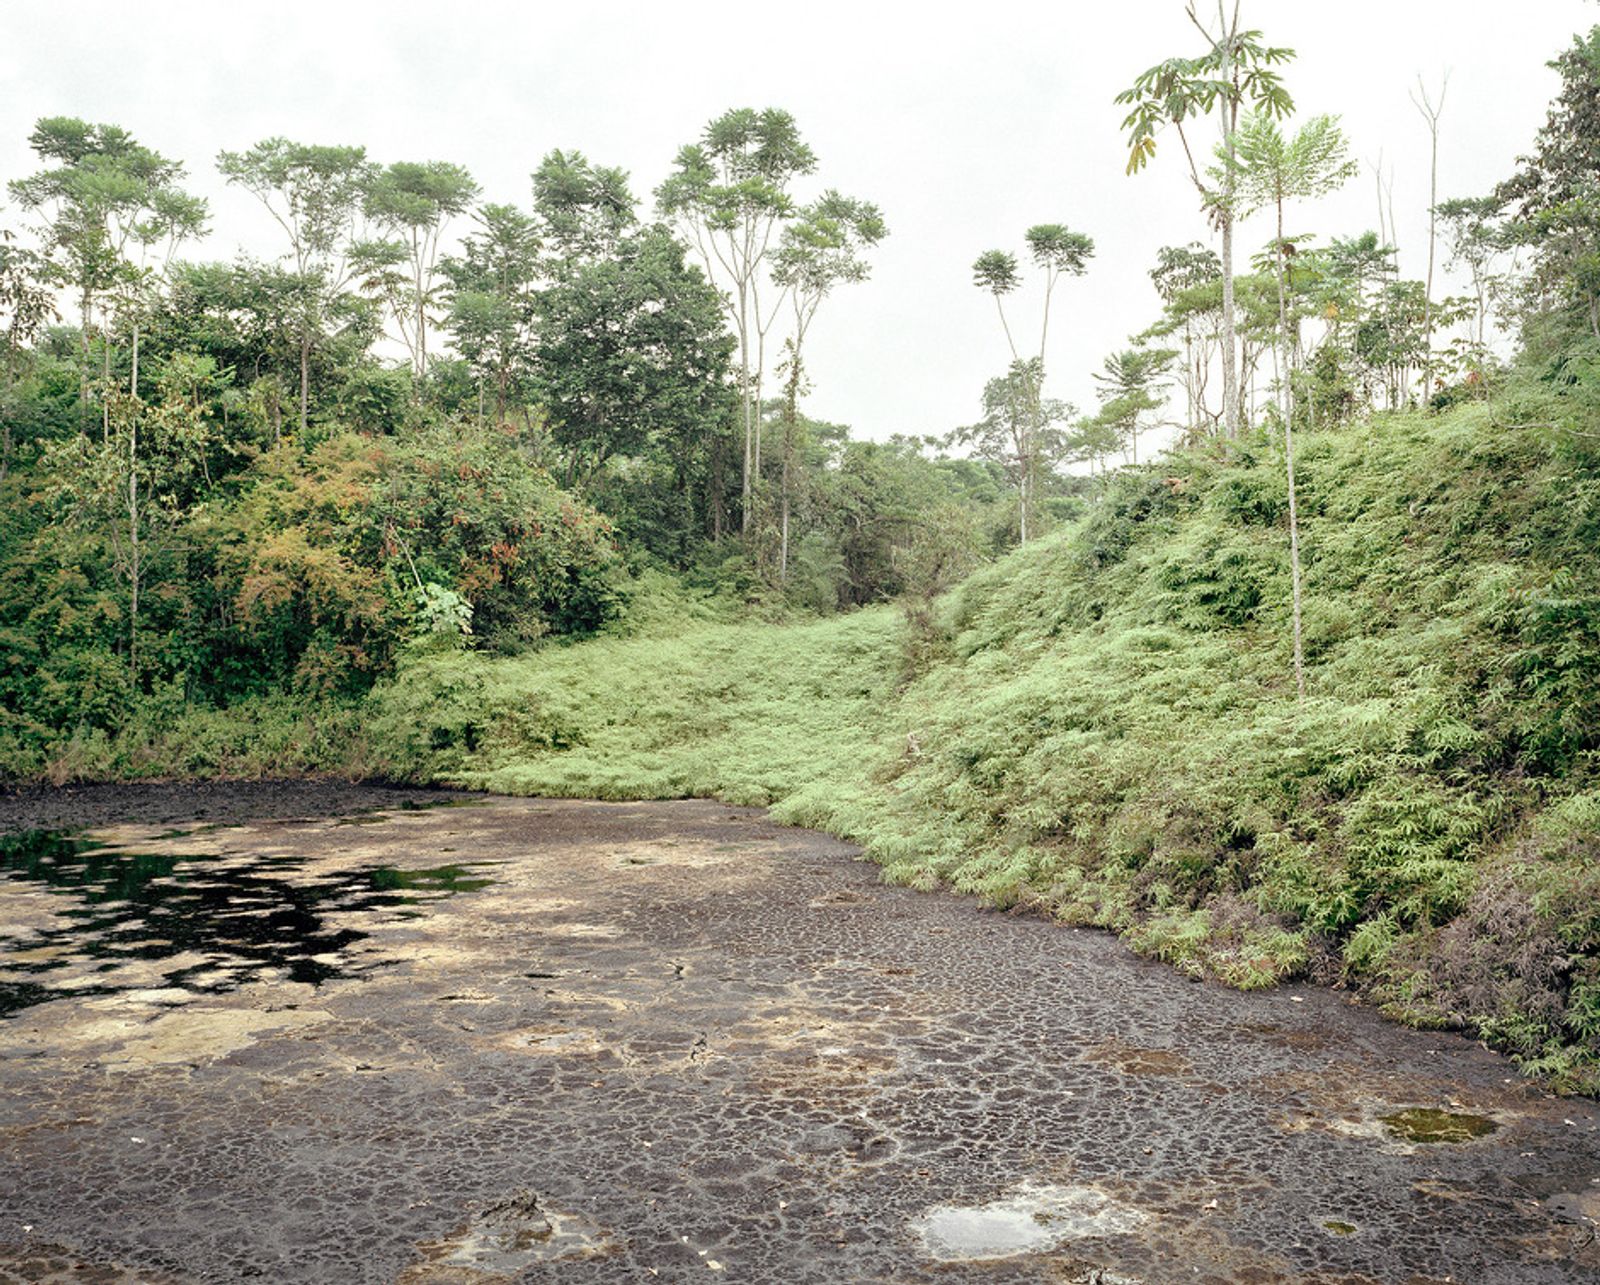 © Pietro Paolini - Image from the Balance on the zero. Ecuador 2011-2013 photography project